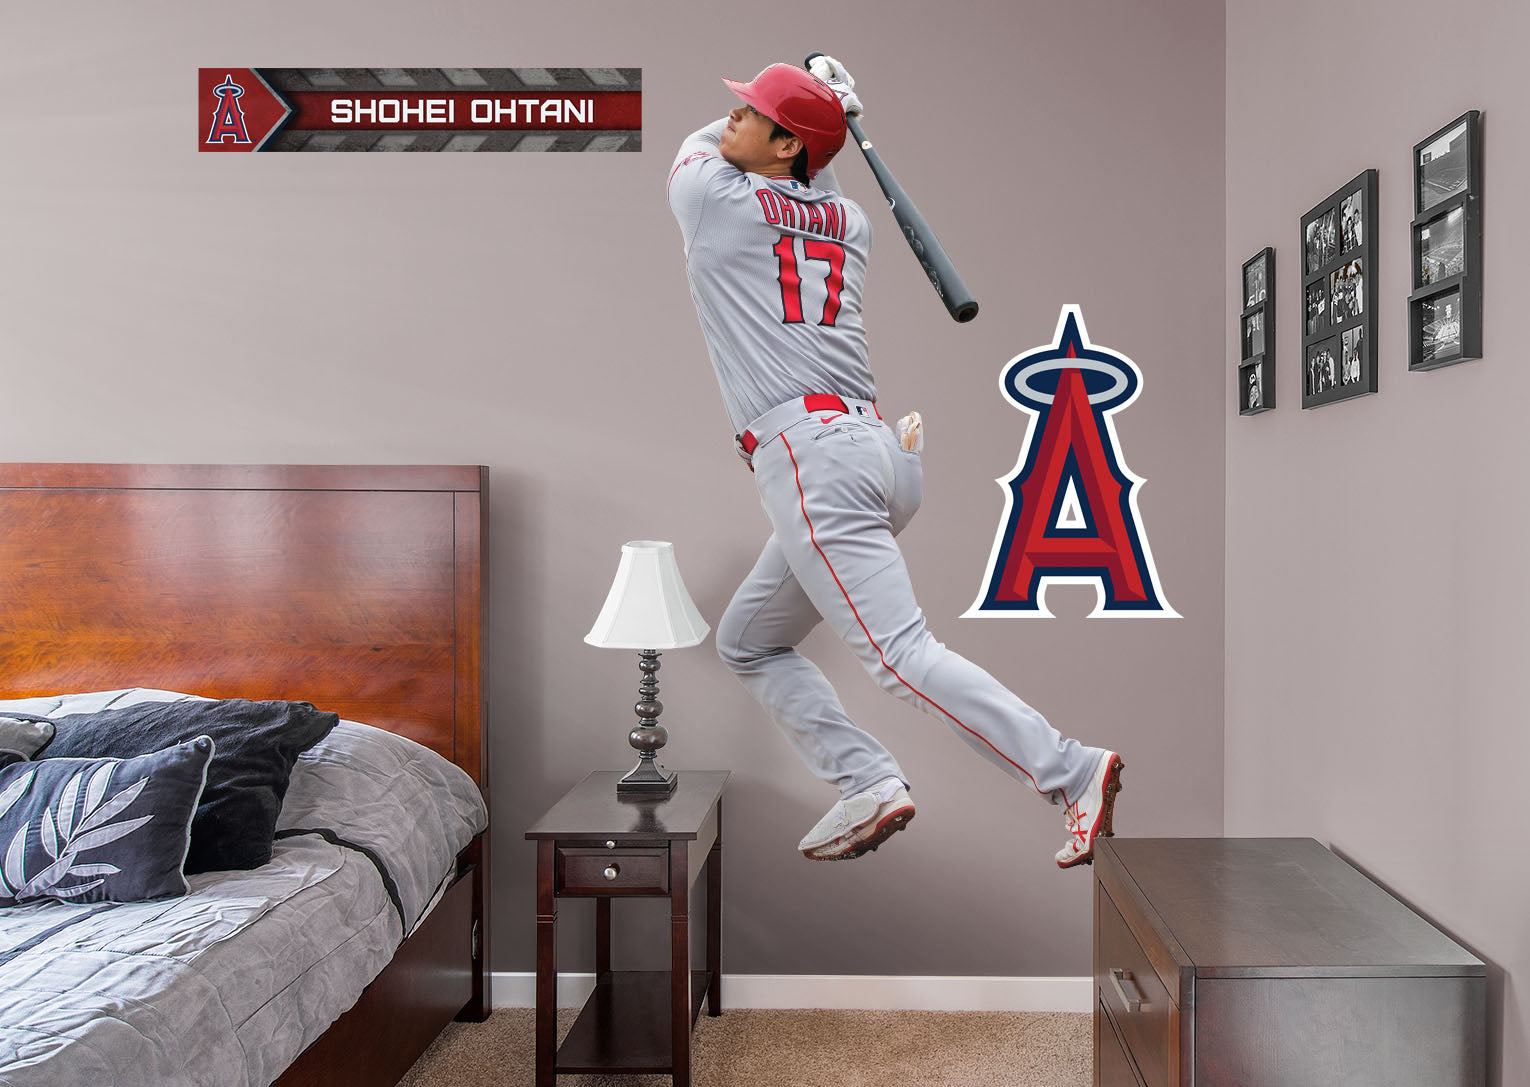 Los Angeles Angels: Shohei Ohtani 2021 - Officially Licensed MLB